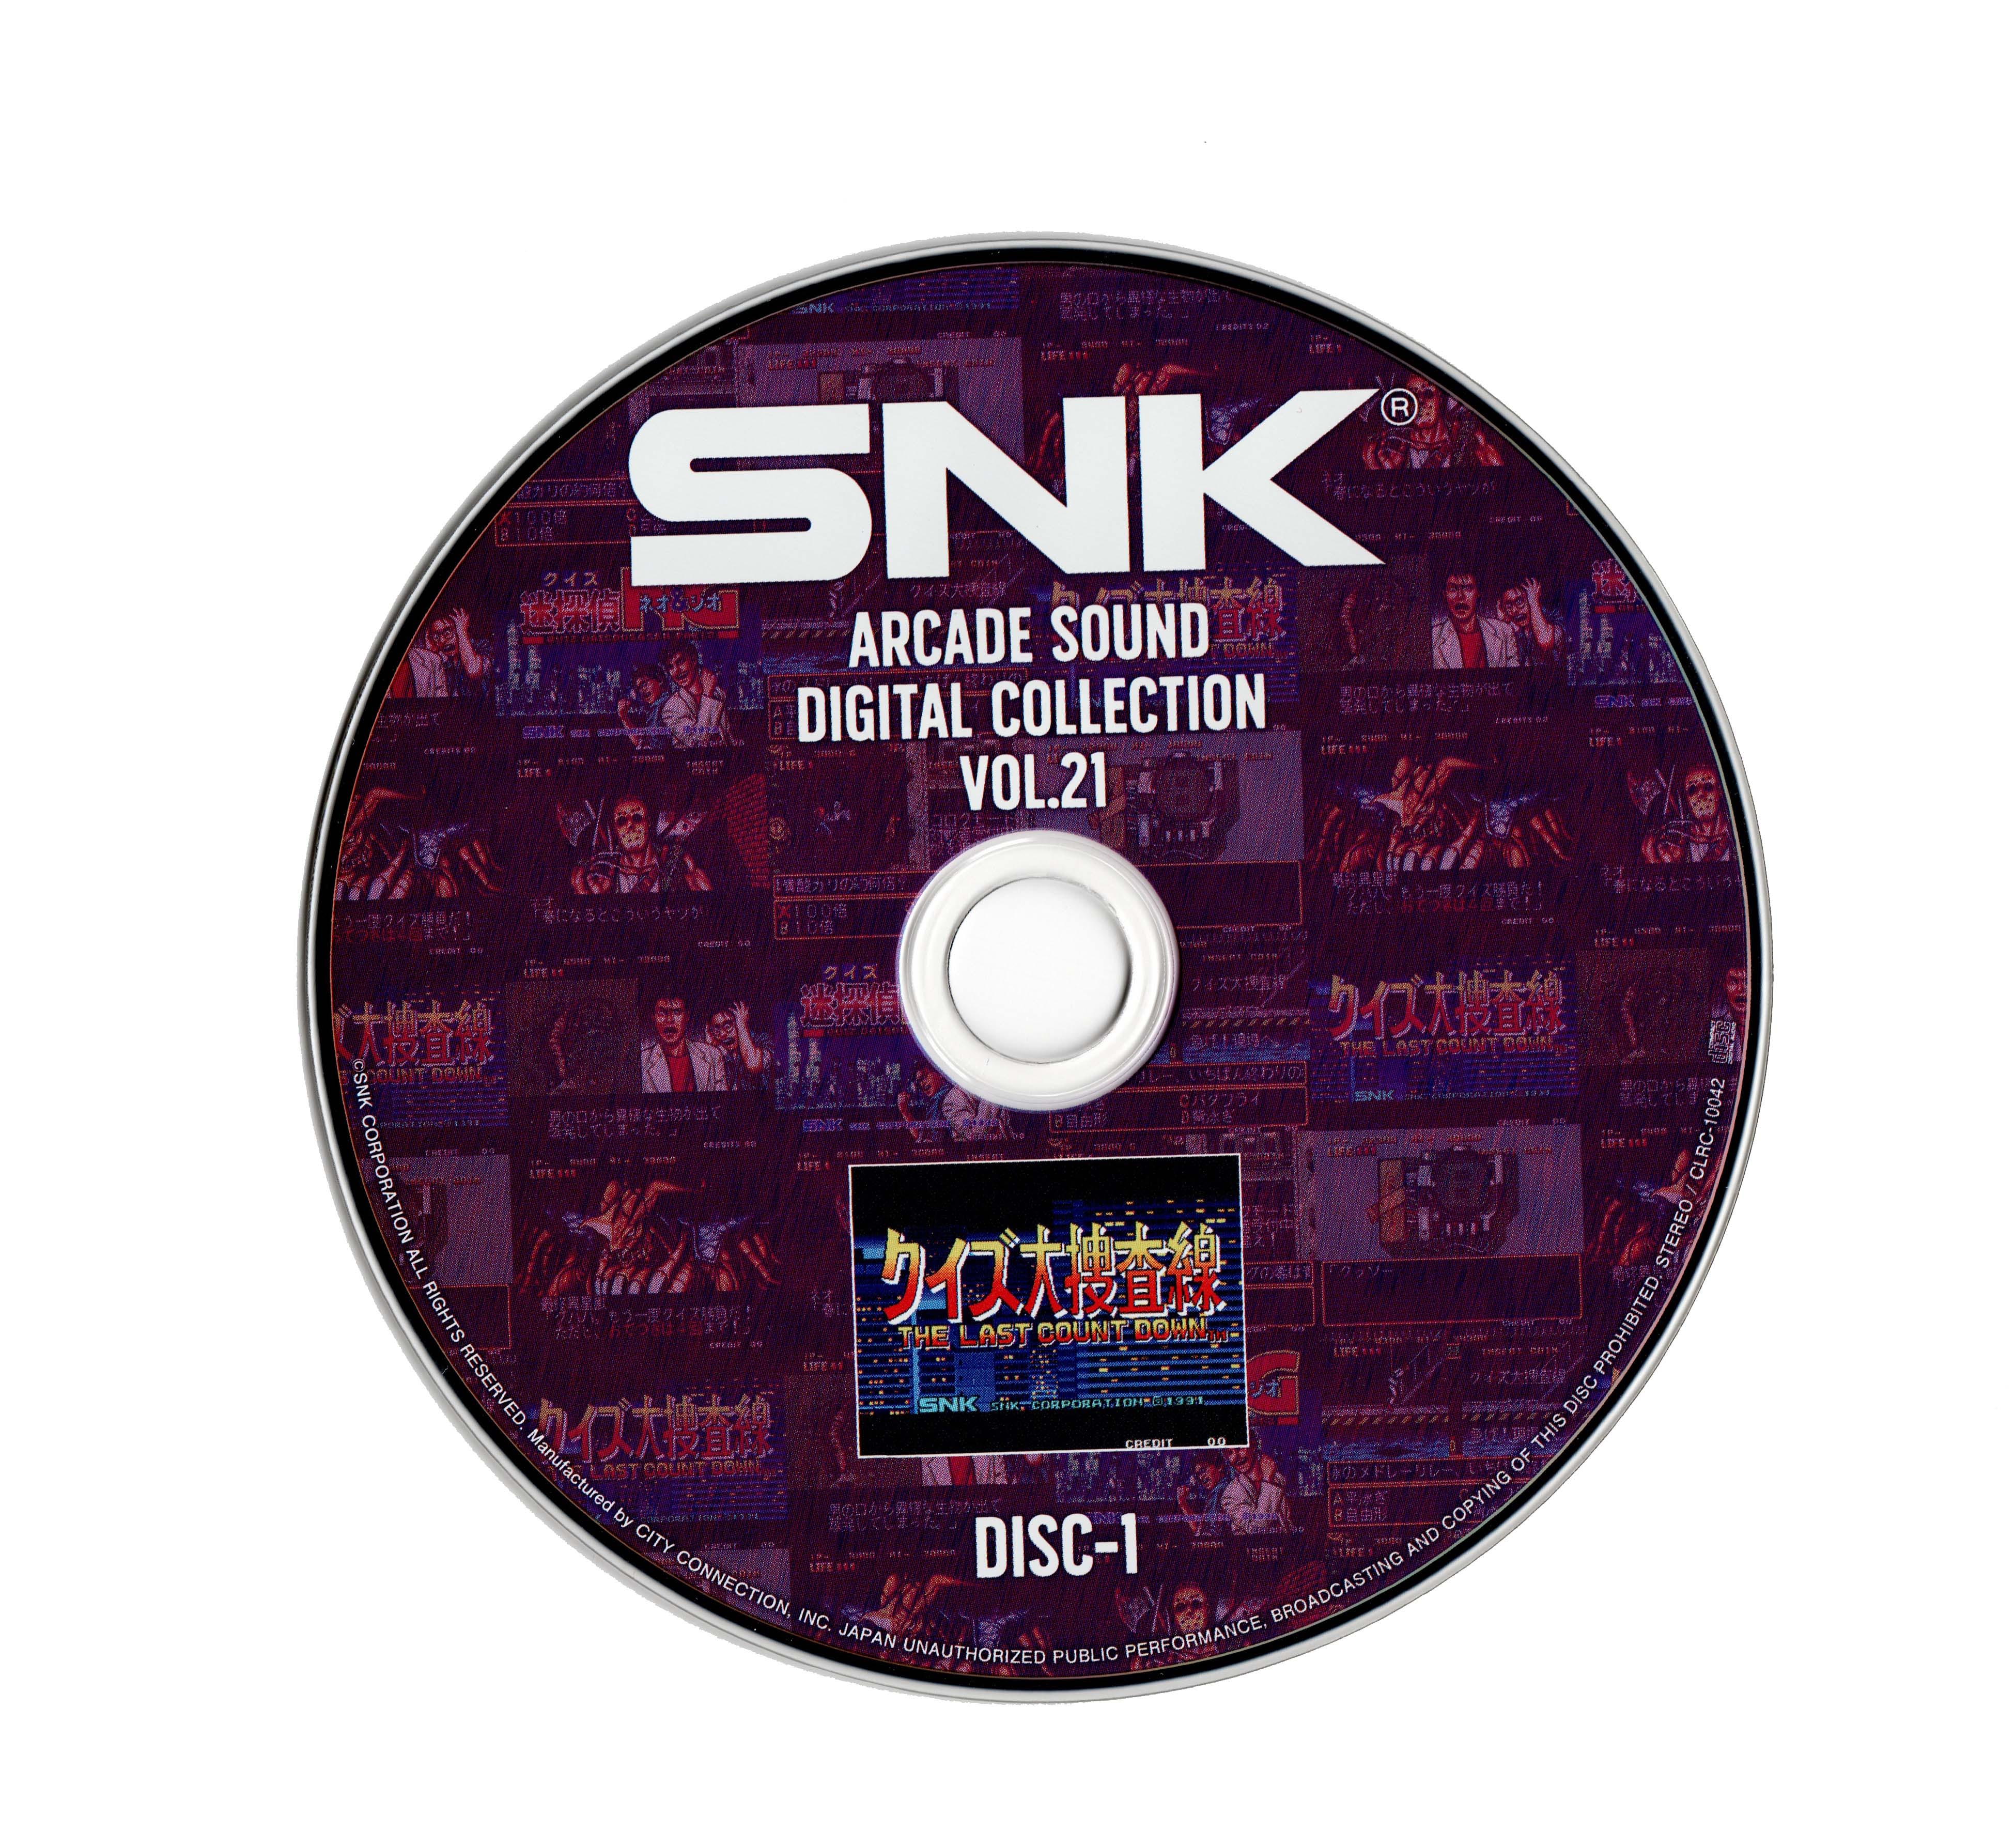 SNK ARCADE SOUND DIGITAL COLLECTION VOL.21 (2020) MP3 - Download SNK ARCADE  SOUND DIGITAL COLLECTION VOL.21 (2020) Soundtracks for FREE!